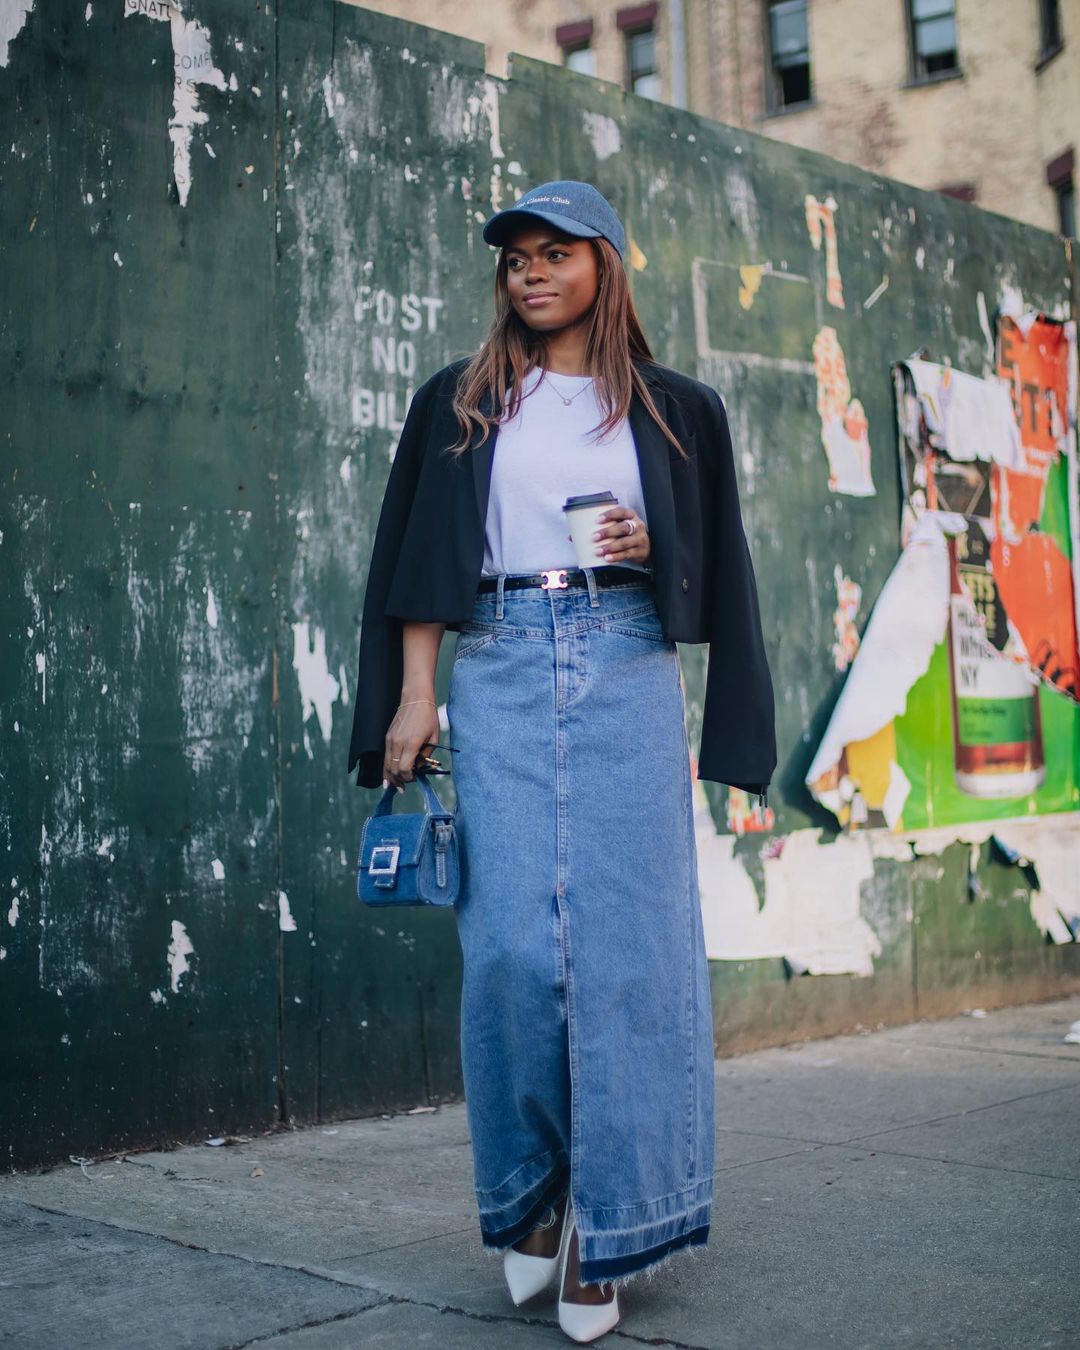 Maxi Skirts Are Back for 2022, See How to Wear Them All Year